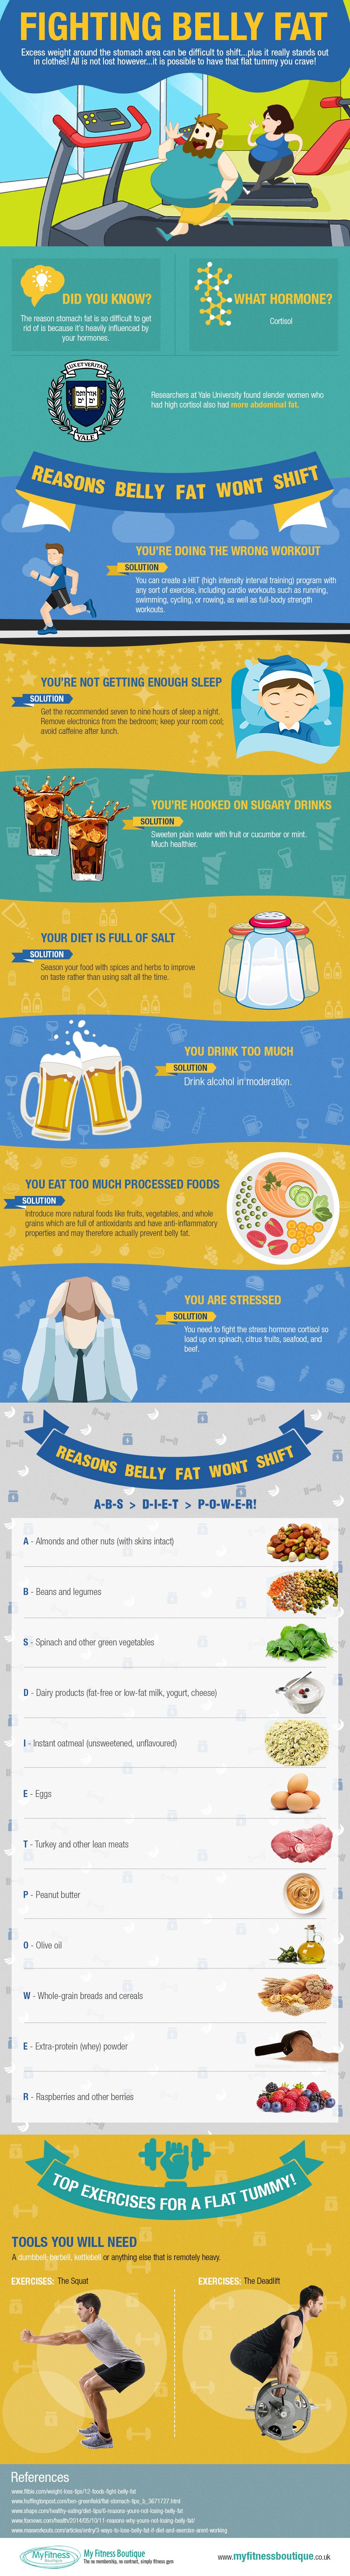 Fighting Belly Fat Infographic (1)